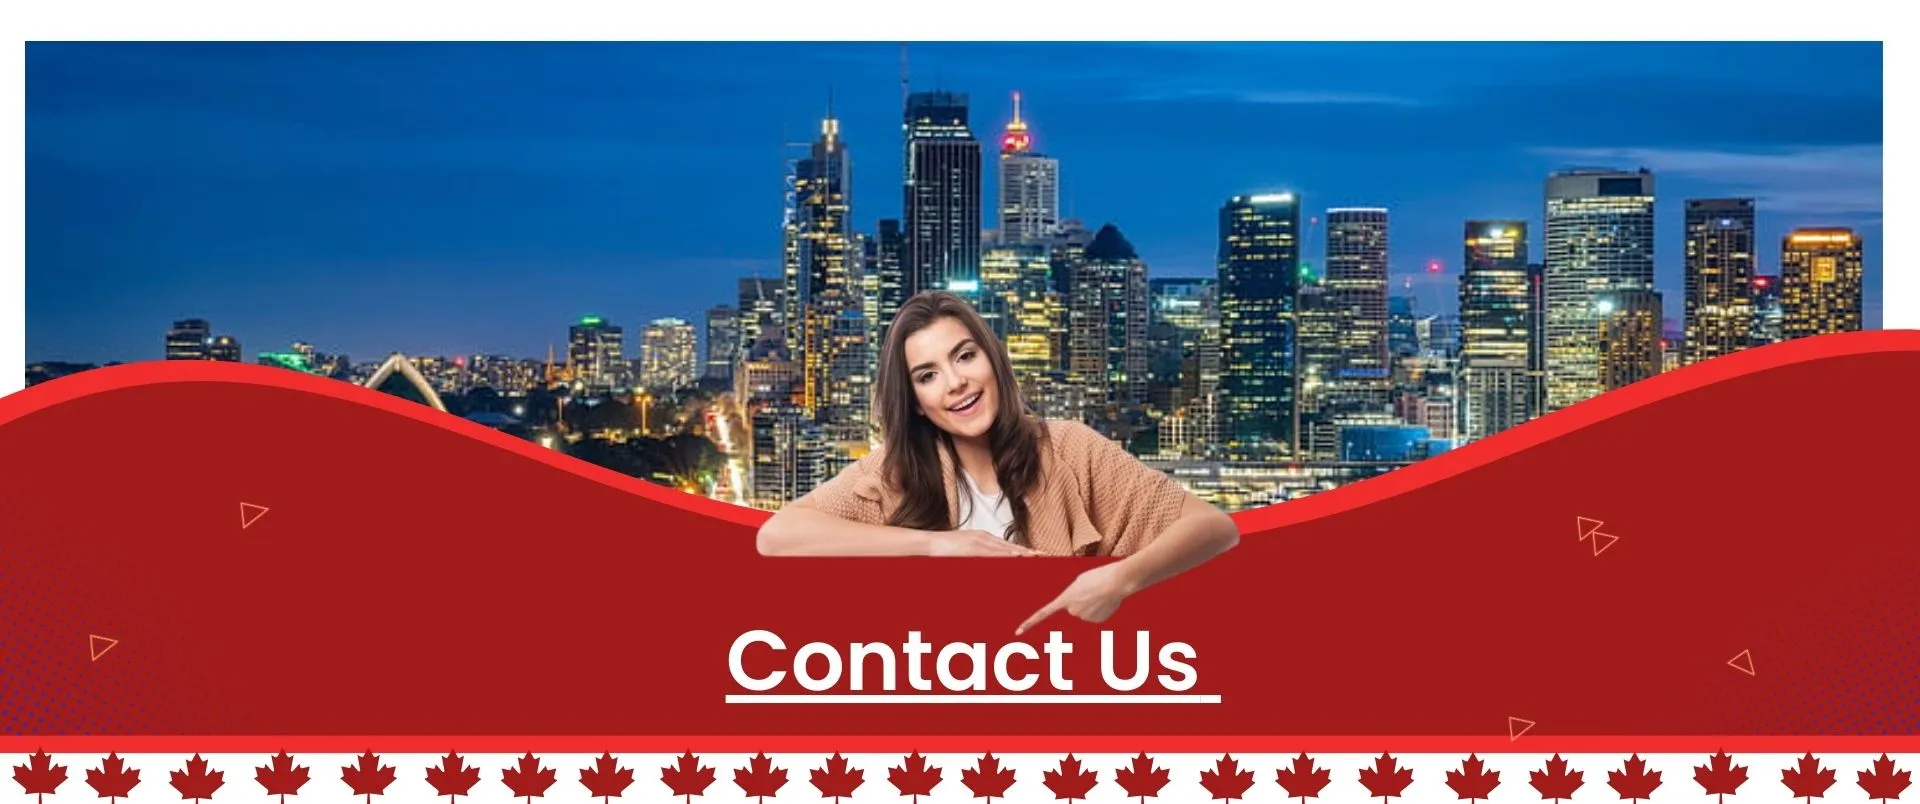 Contact Us for Immigration Services A girl pointing out with building in background